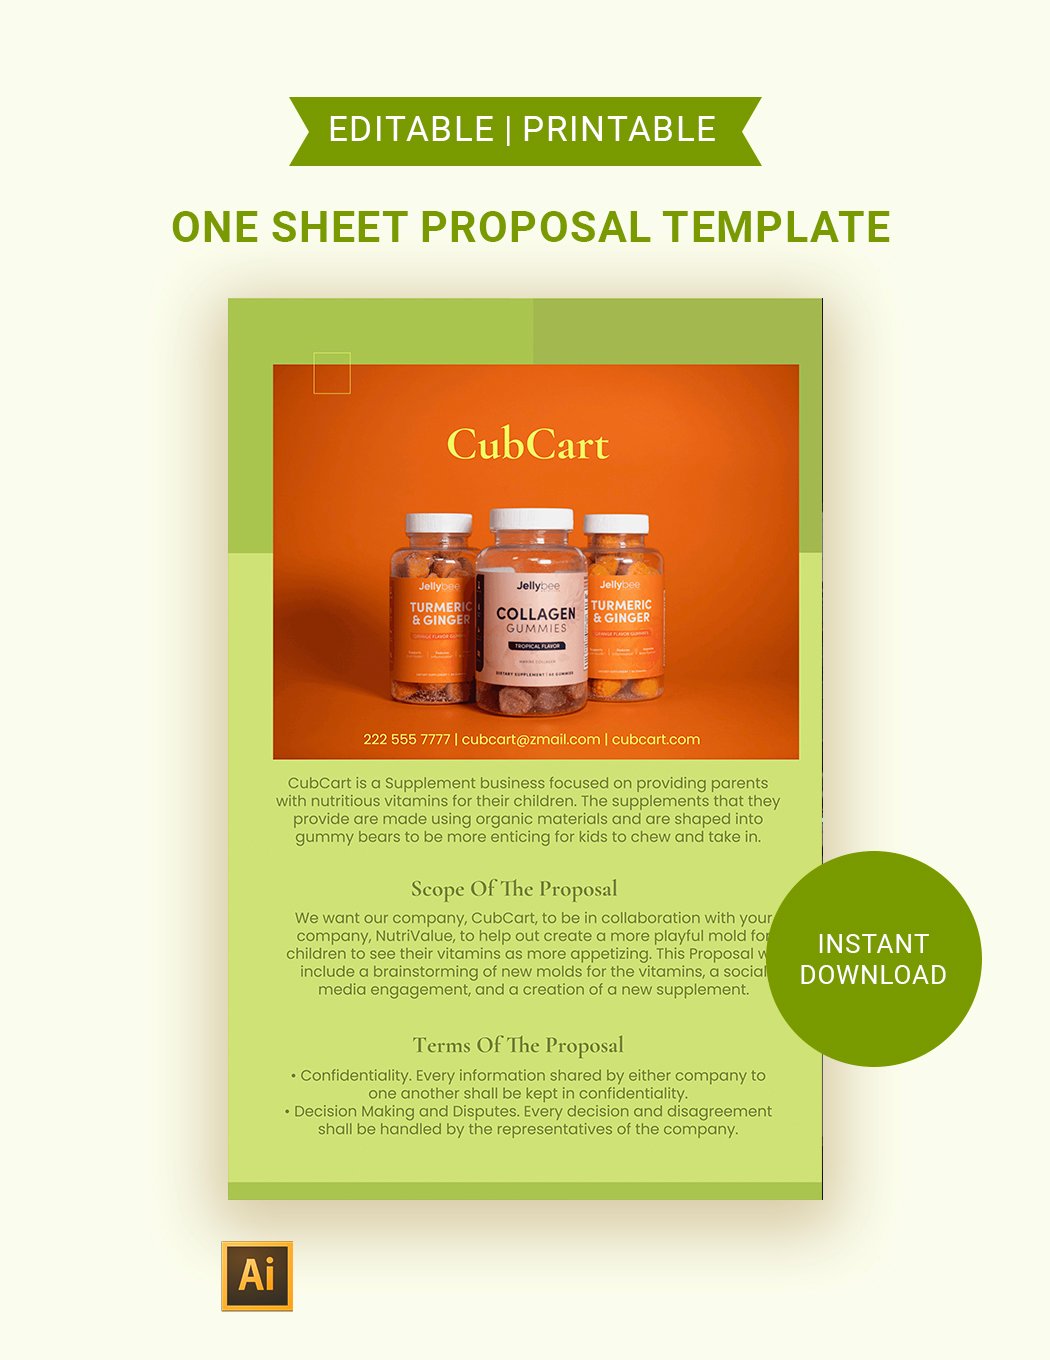 One Sheet Proposal Template